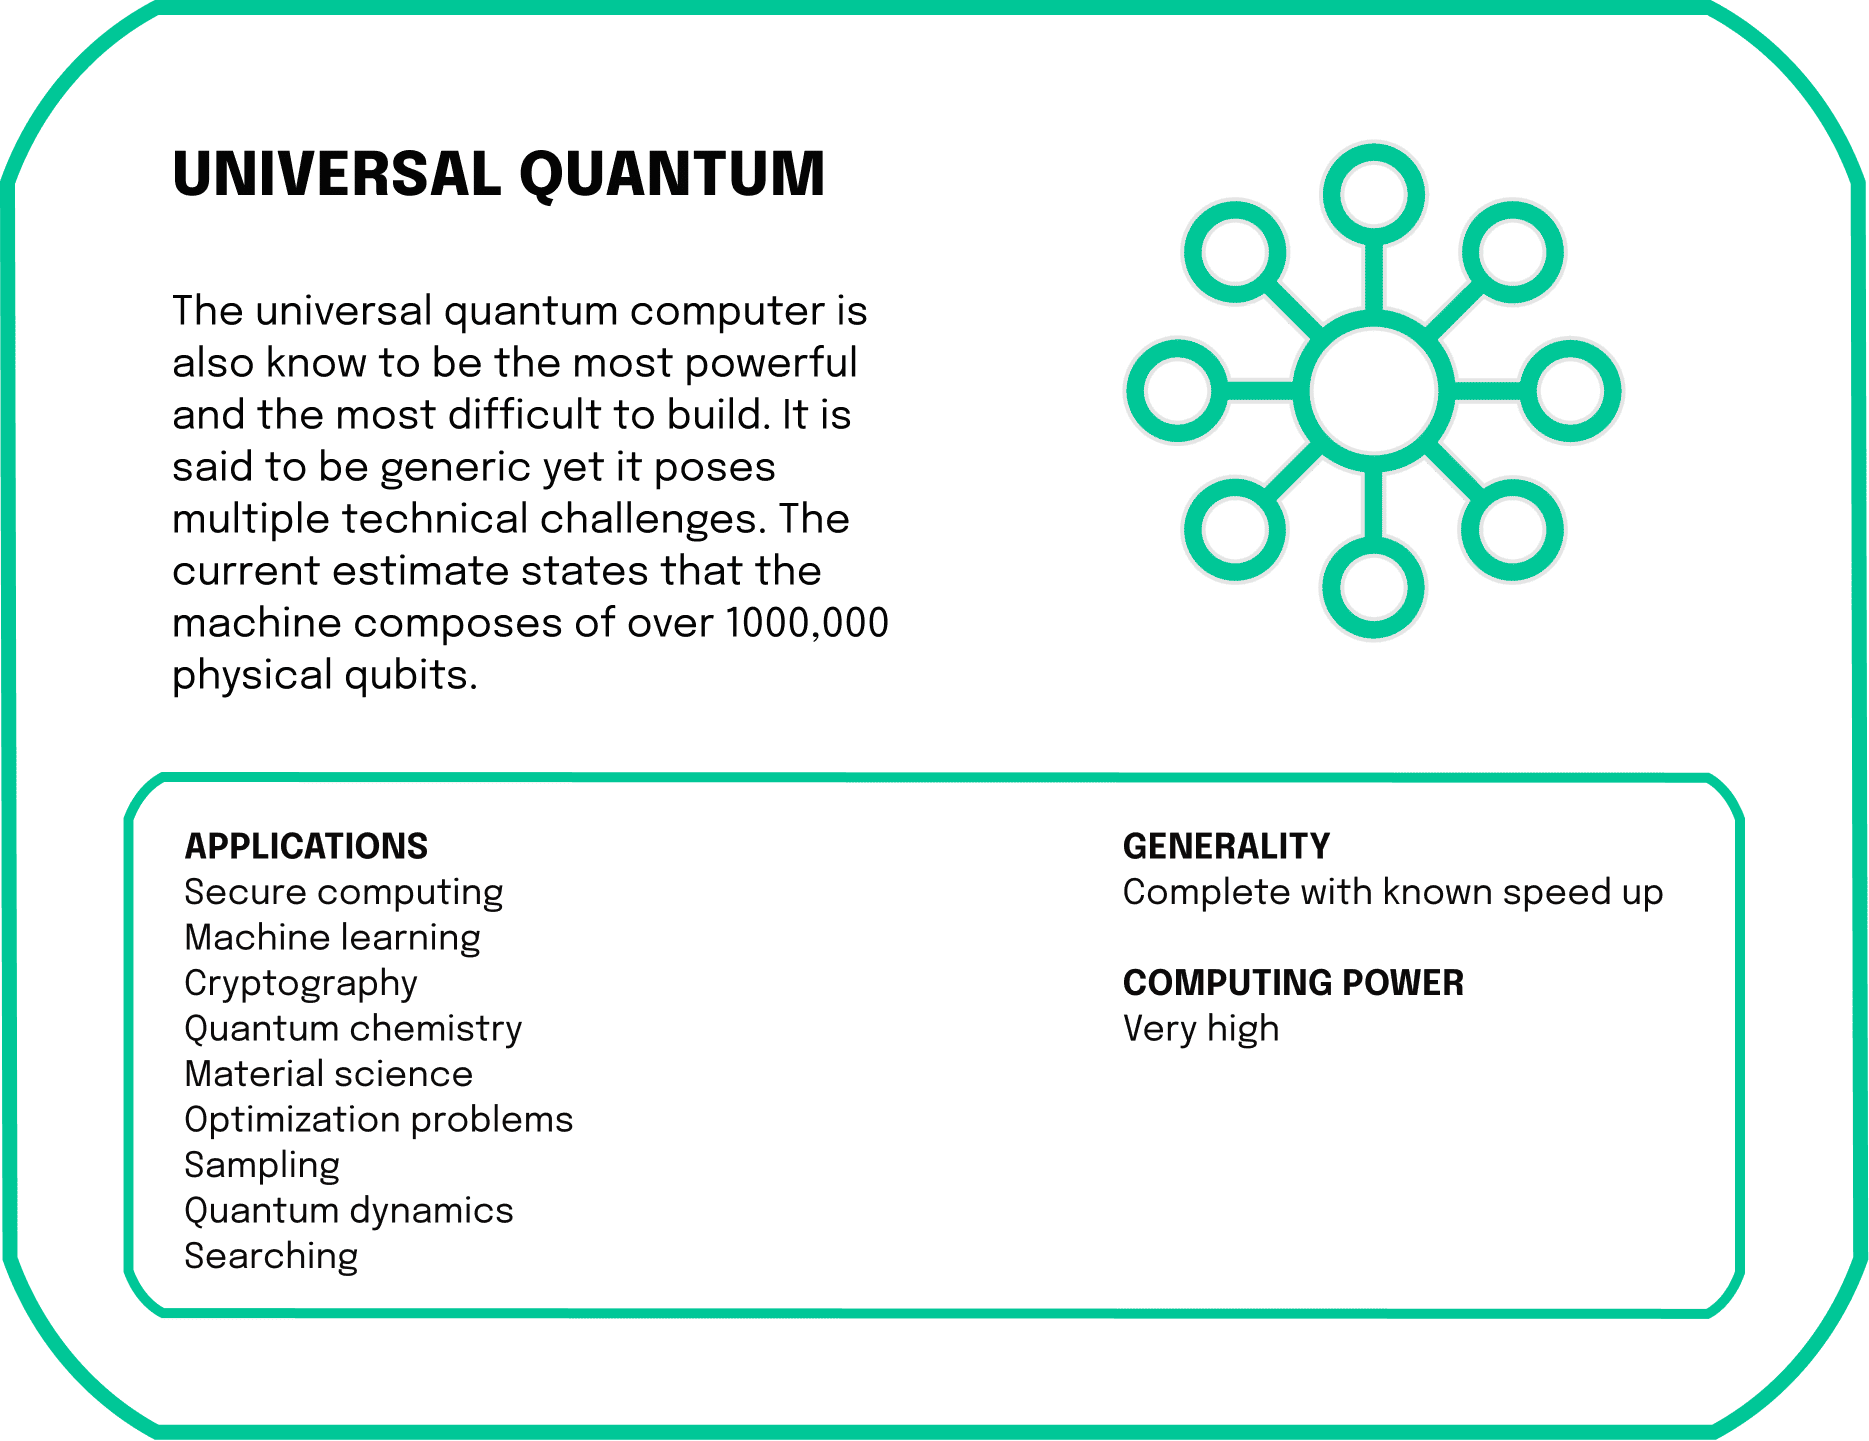 The universal quantum computer is also known to be the most powerful and the most difficult to build. It is said to be generic yet it poses multiple technical challenges. The current estimate states that the machine composes of over 1000,000 physical qubits.